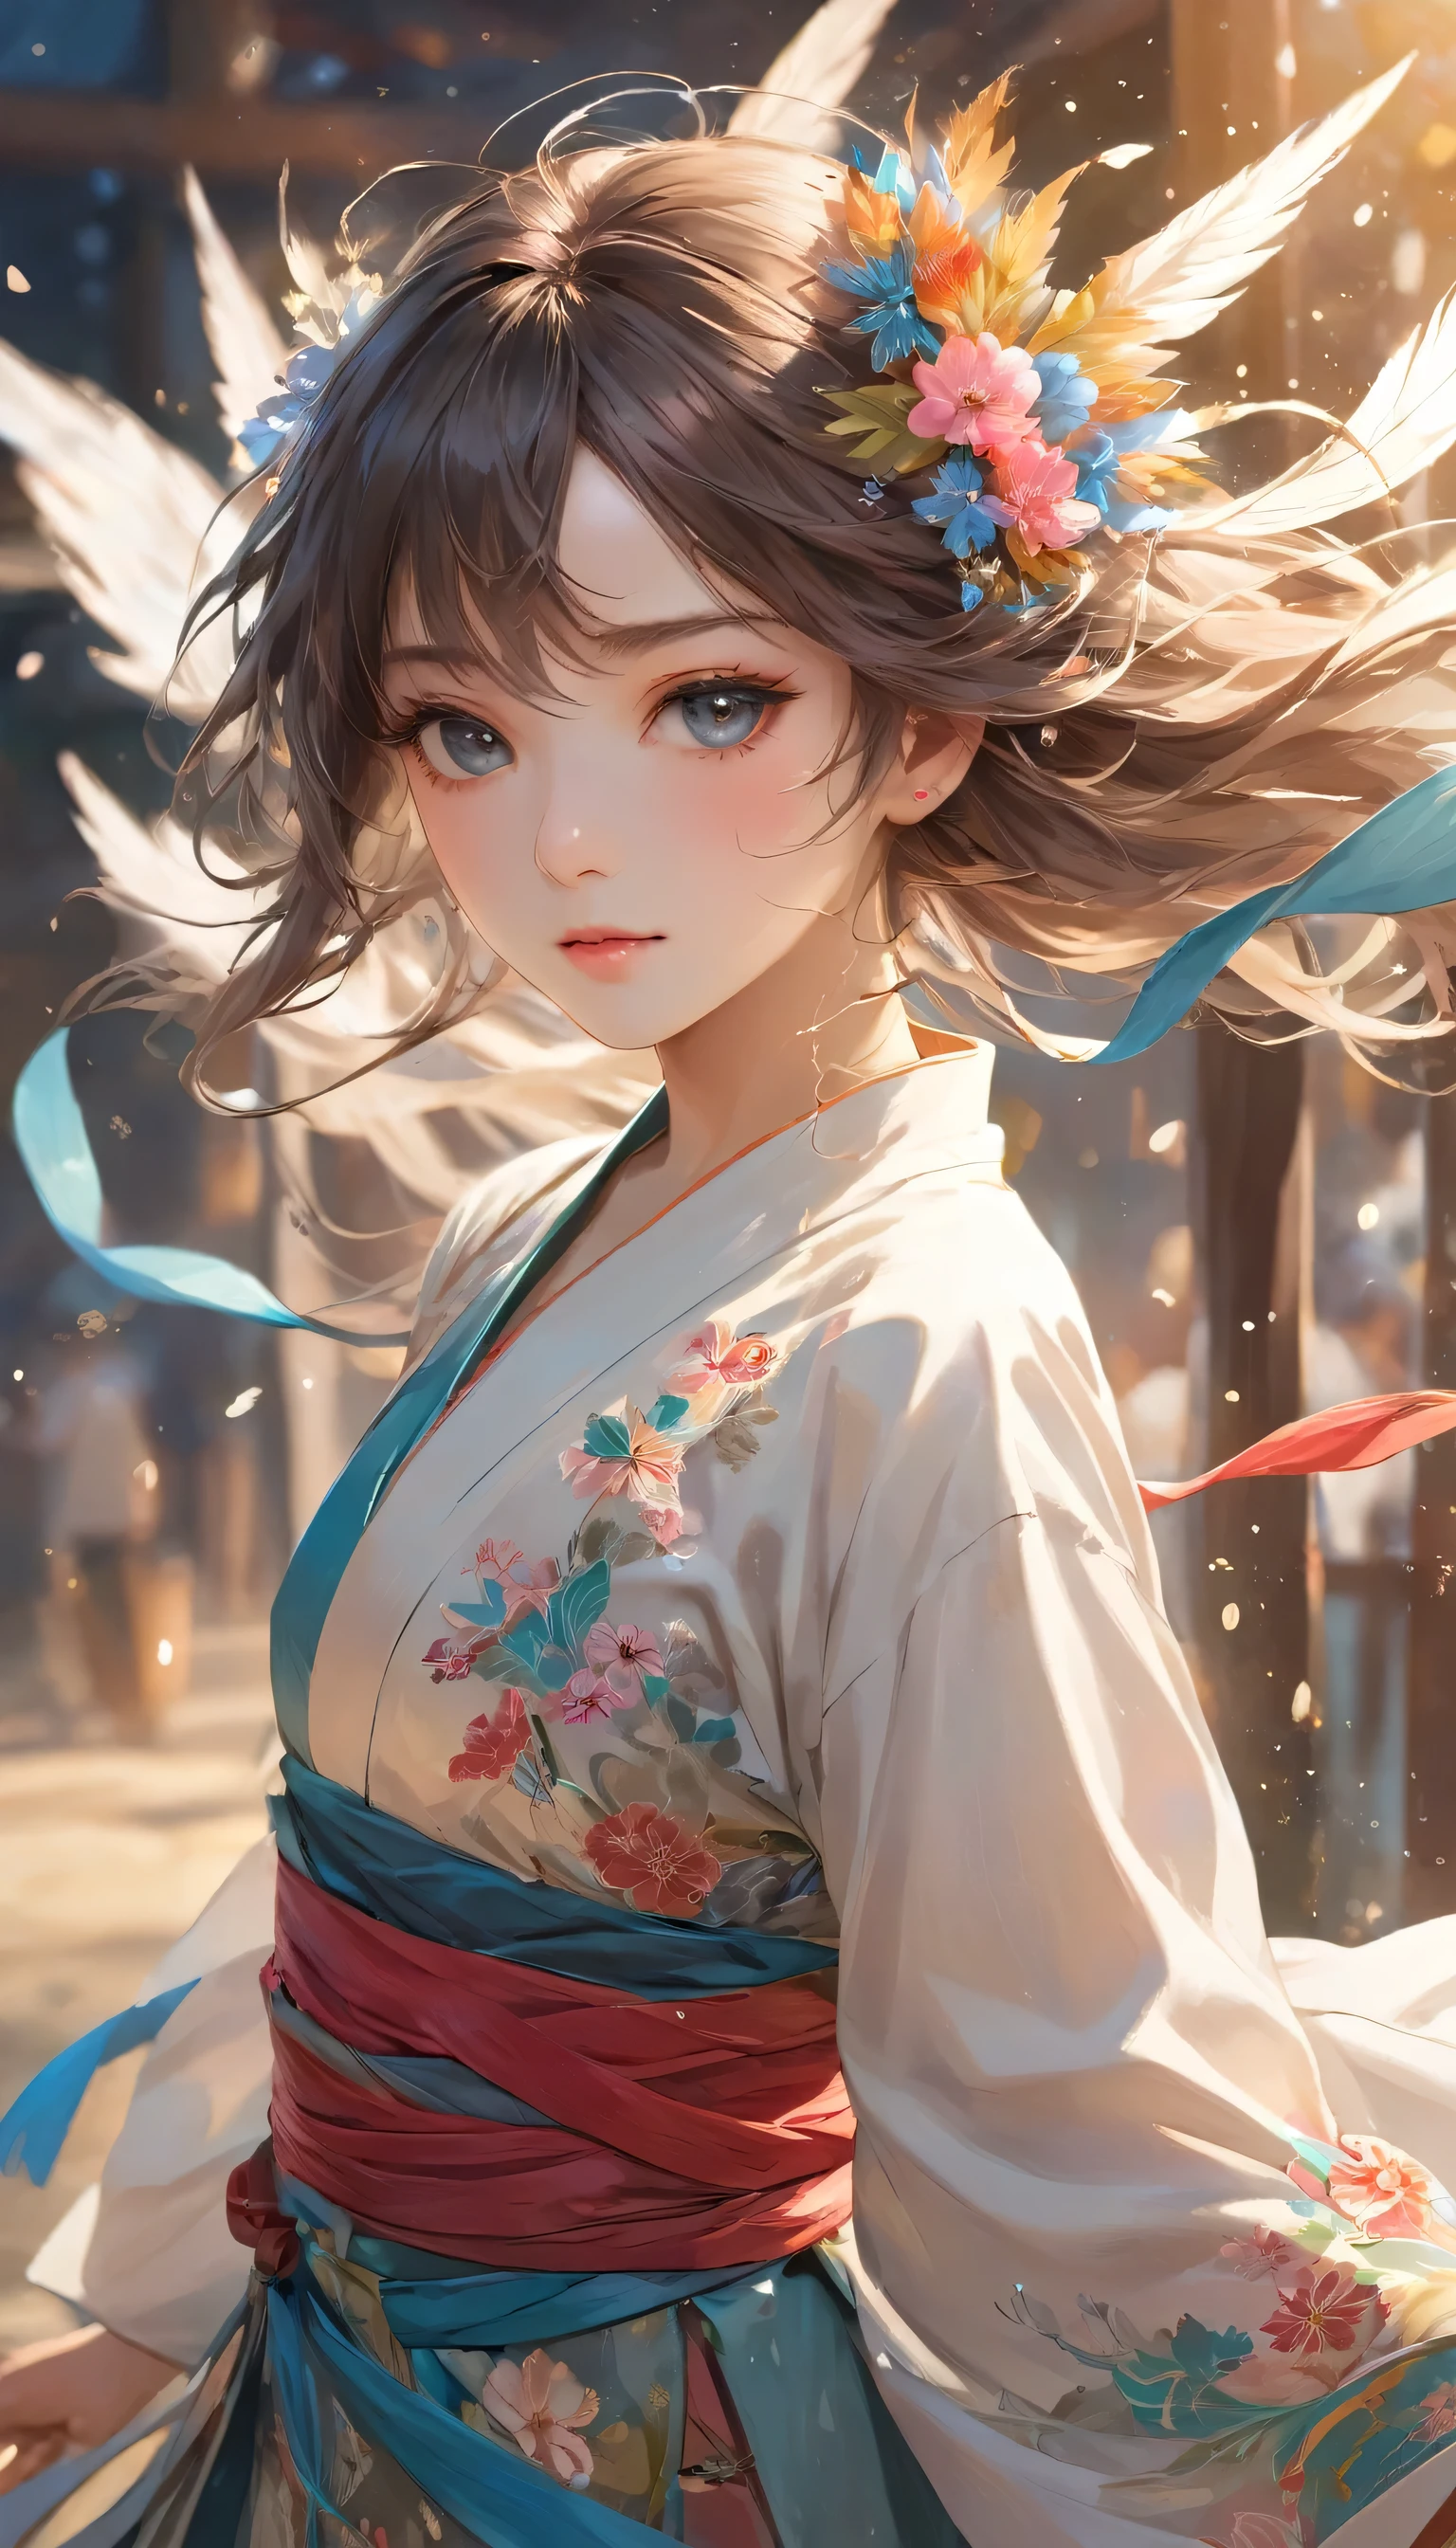 Holding a sword,A swordsman ready to fight,She is dressed as a female dancer.,Ready your sword,An illustration,animation,The swordsman disguised himself as a woman to lure his enemies off guard.,Beautiful and cool,Neutral facial features,Empty sake barrel,Dancer&#39;s costume:detailed,Wide range of colors,colorful,rendering,Colorful,Cast a colorful spell,Battle scene effects that liven up the battle,Focus on the swordsman,Fight with swords:Metal Reflection:Straight blade:sword,highest quality,best masterpiece,Complex details,flash,Very flash,Beautiful light and shadow,rendering,Zentangle Elements,Wind effects,masterpiece,best masterpiece,Carefully and boldly,dynamic,